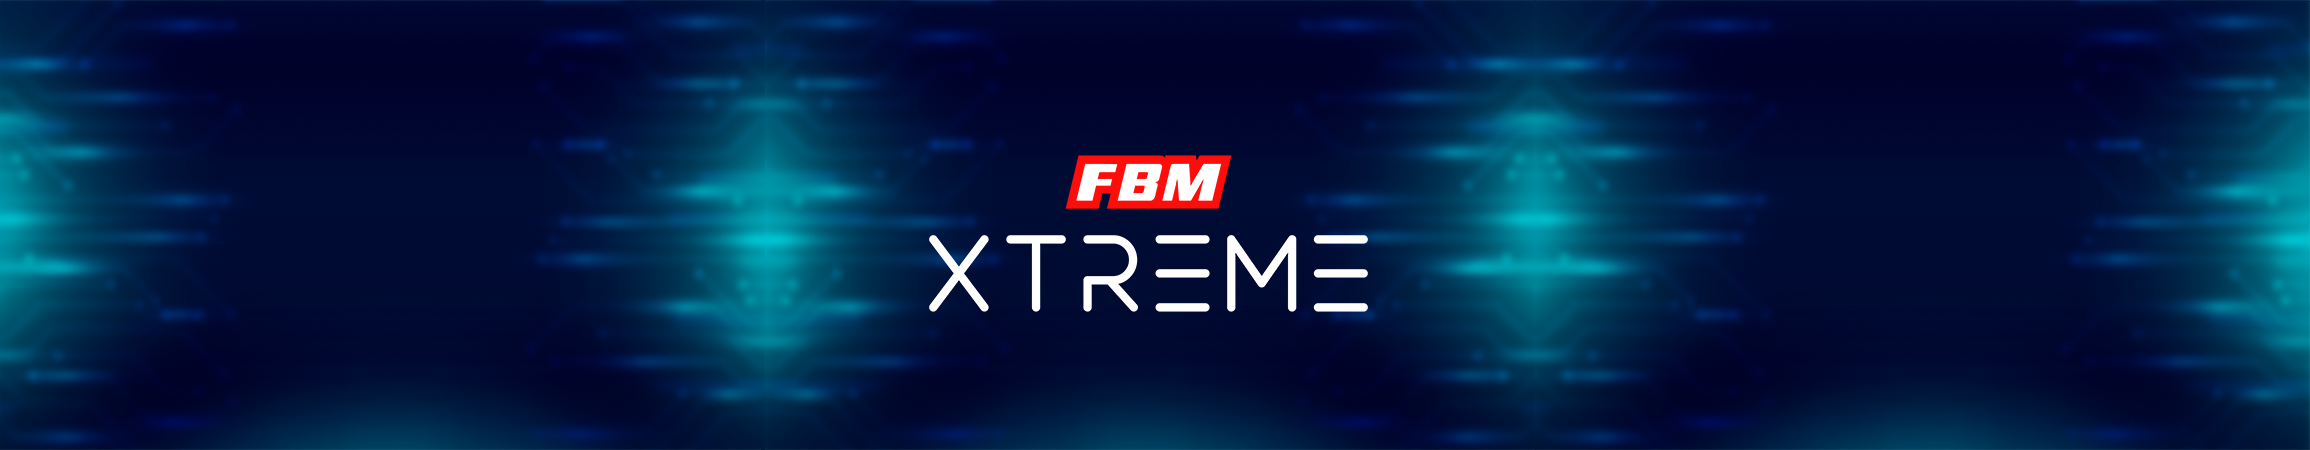 FBM slots are now Xtreme